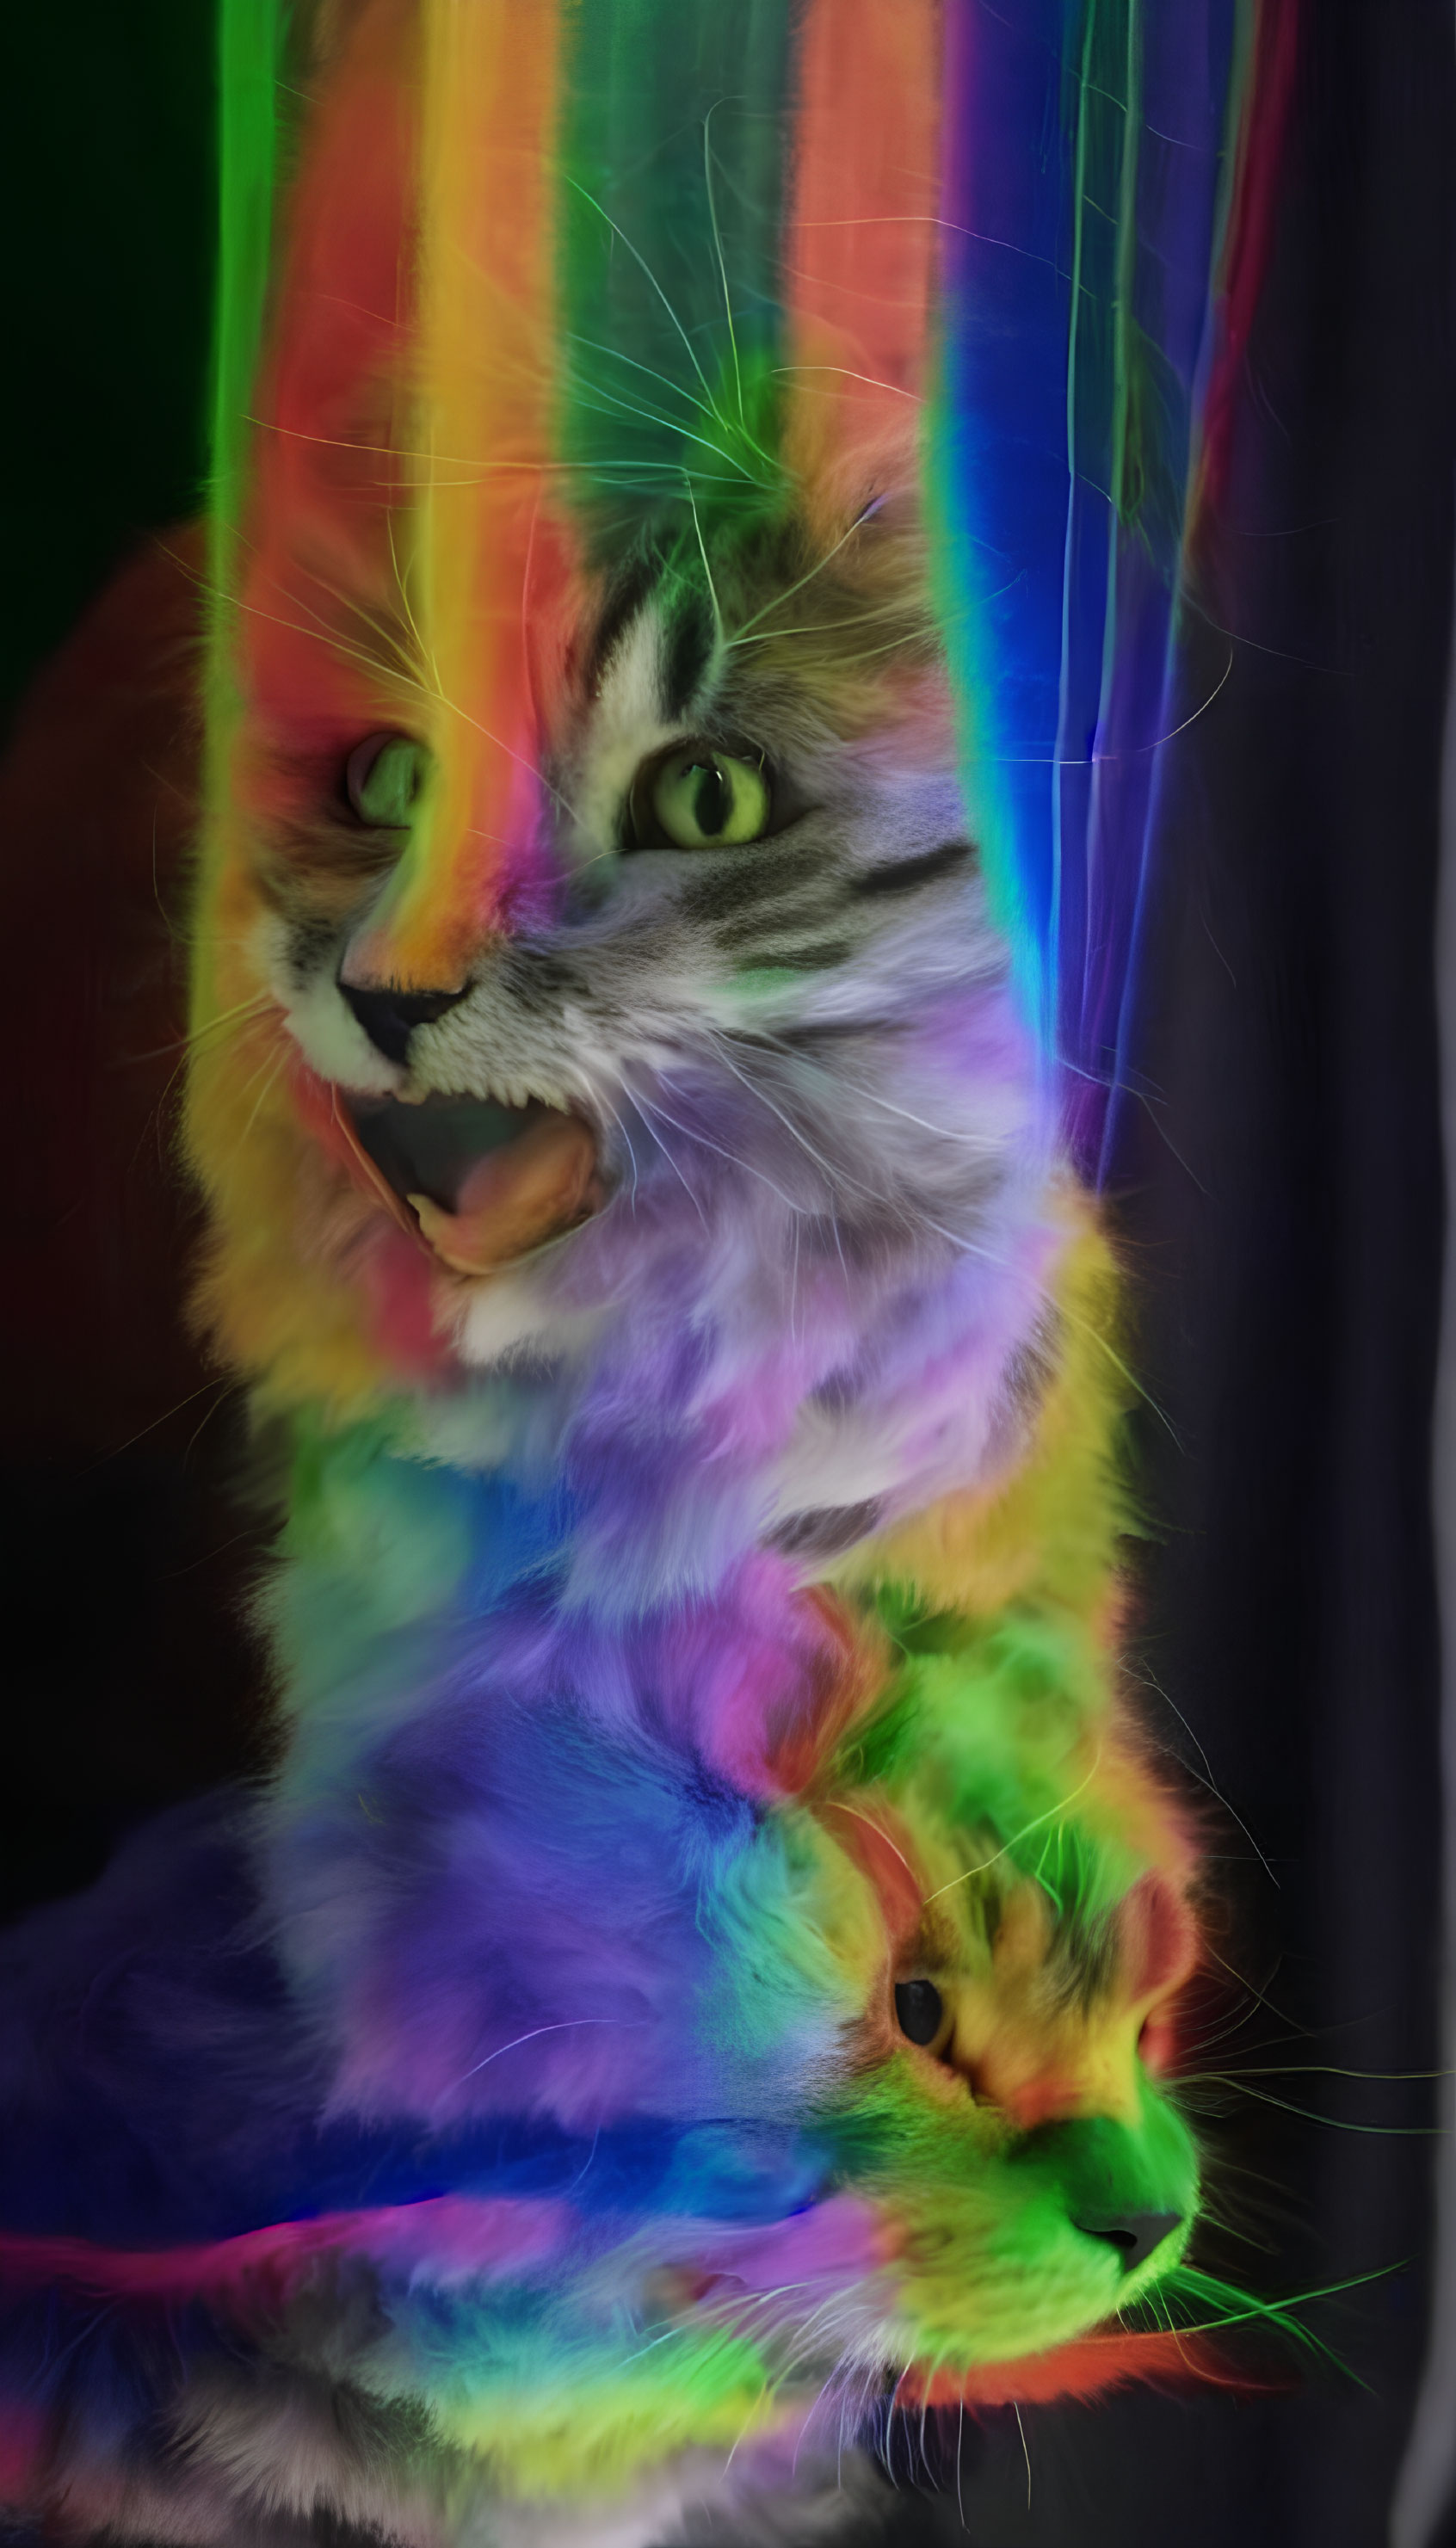 Rainbow-colored cat with vivid fur overlay.